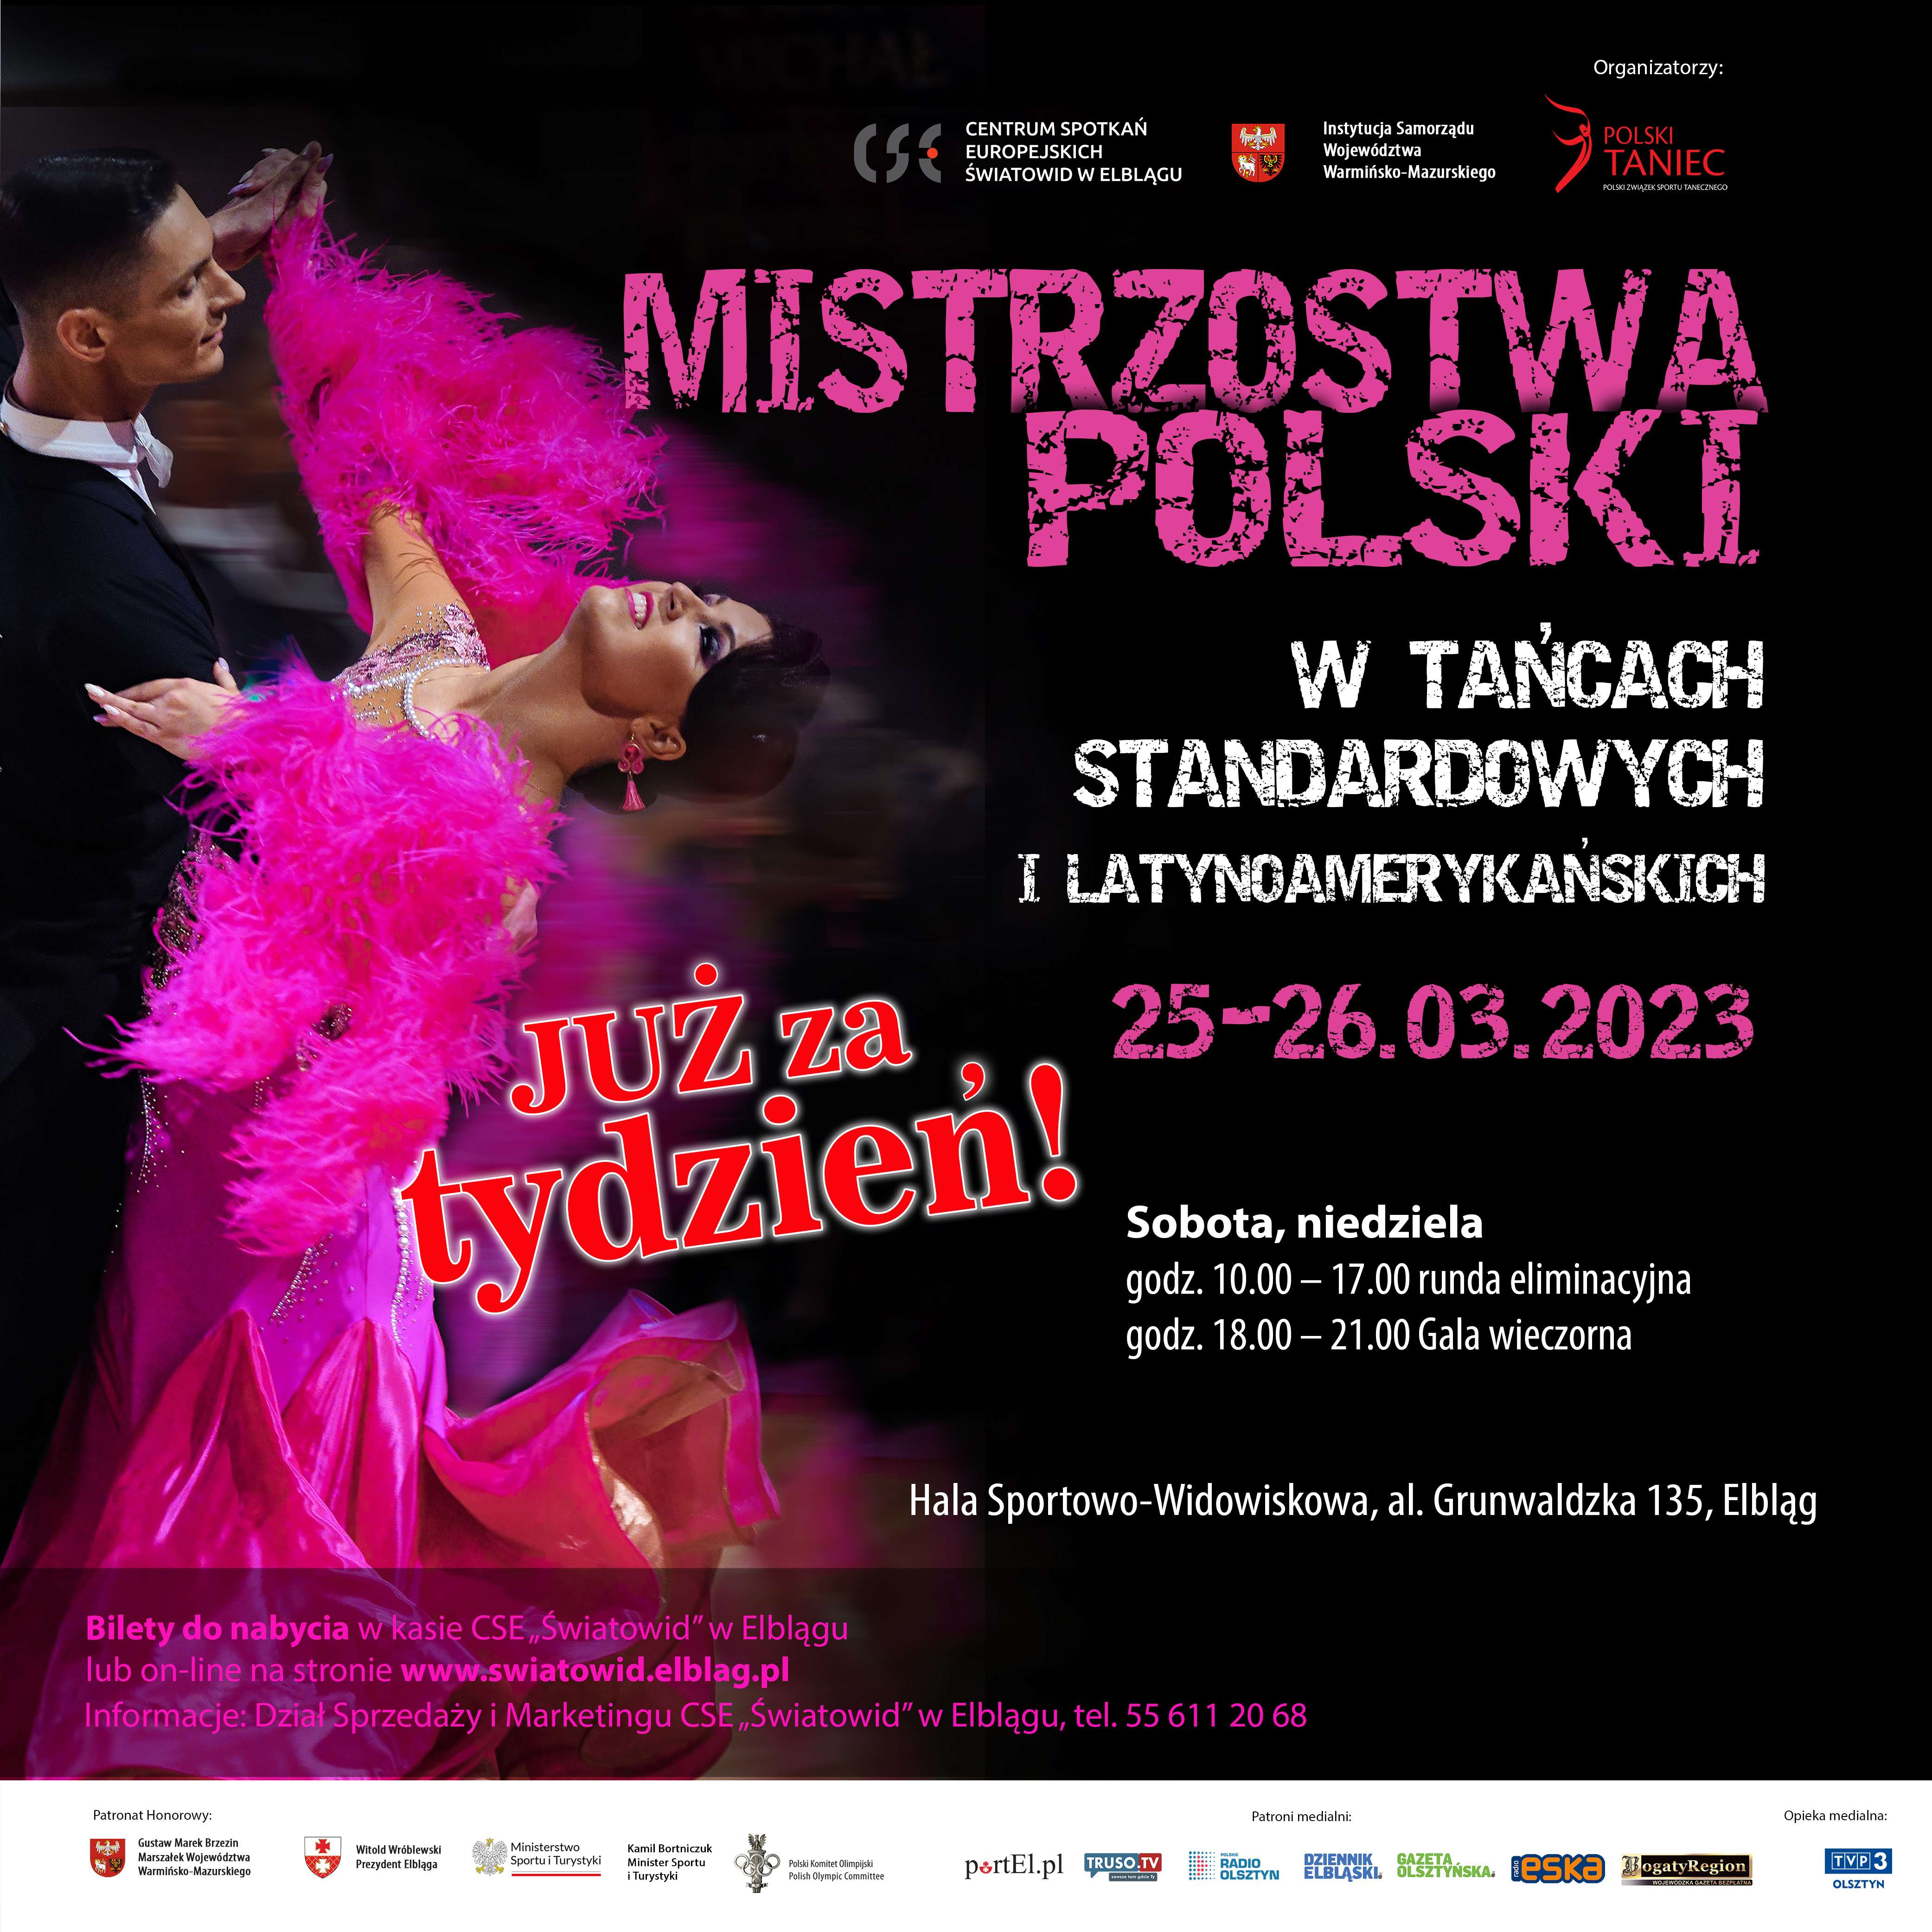 In a week, the Polish Standard and Latin Dance Championships